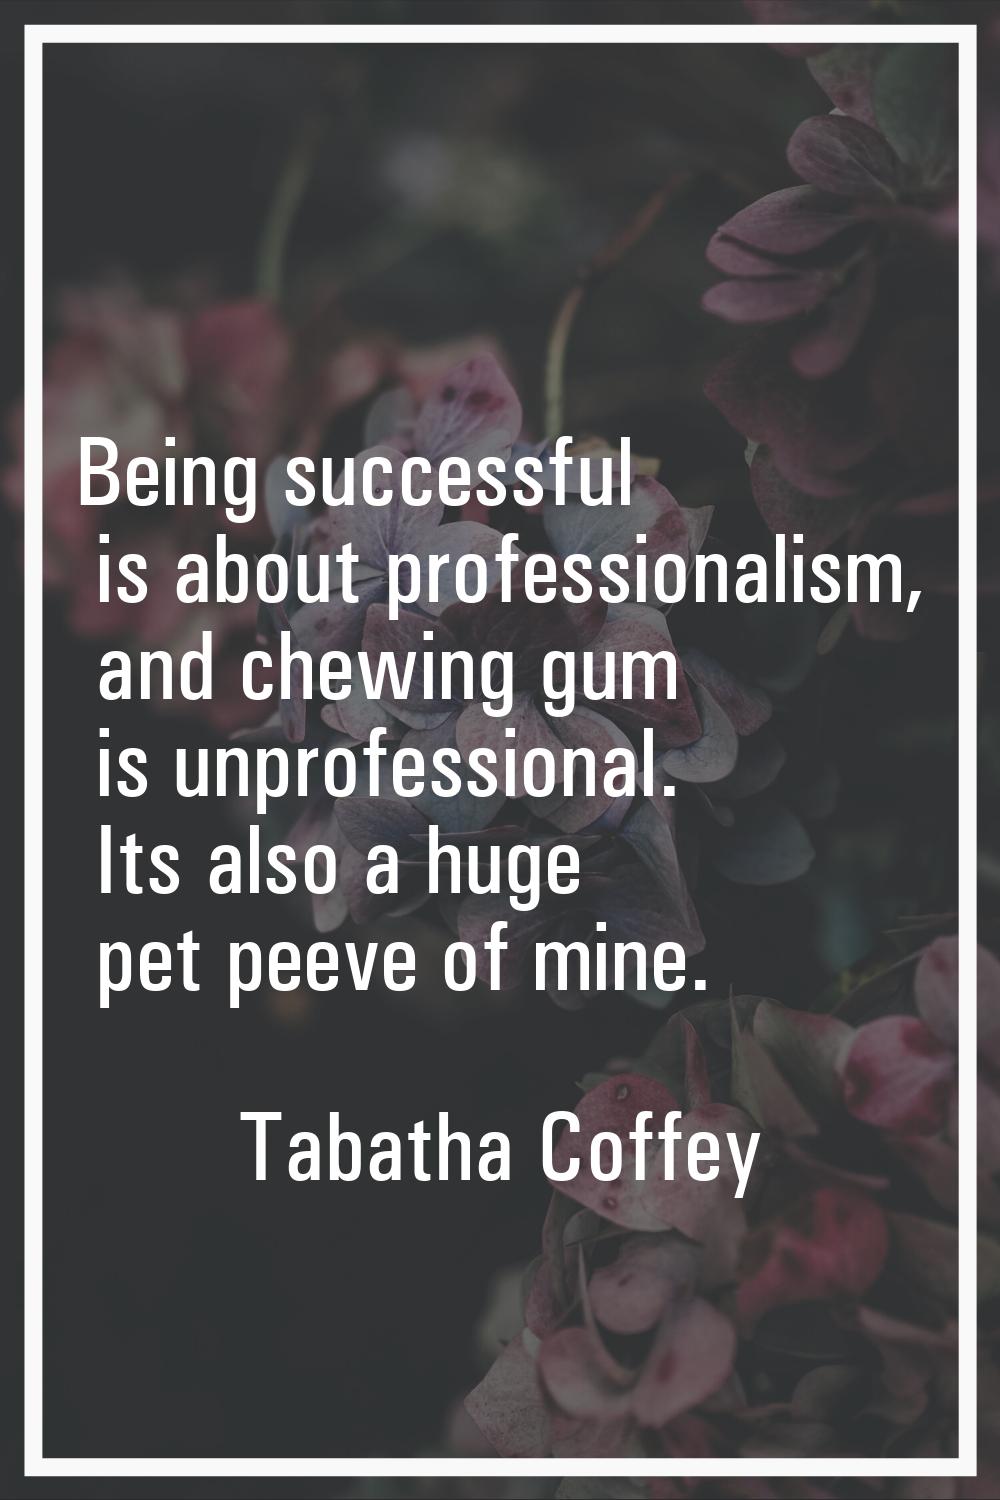 Being successful is about professionalism, and chewing gum is unprofessional. Its also a huge pet p